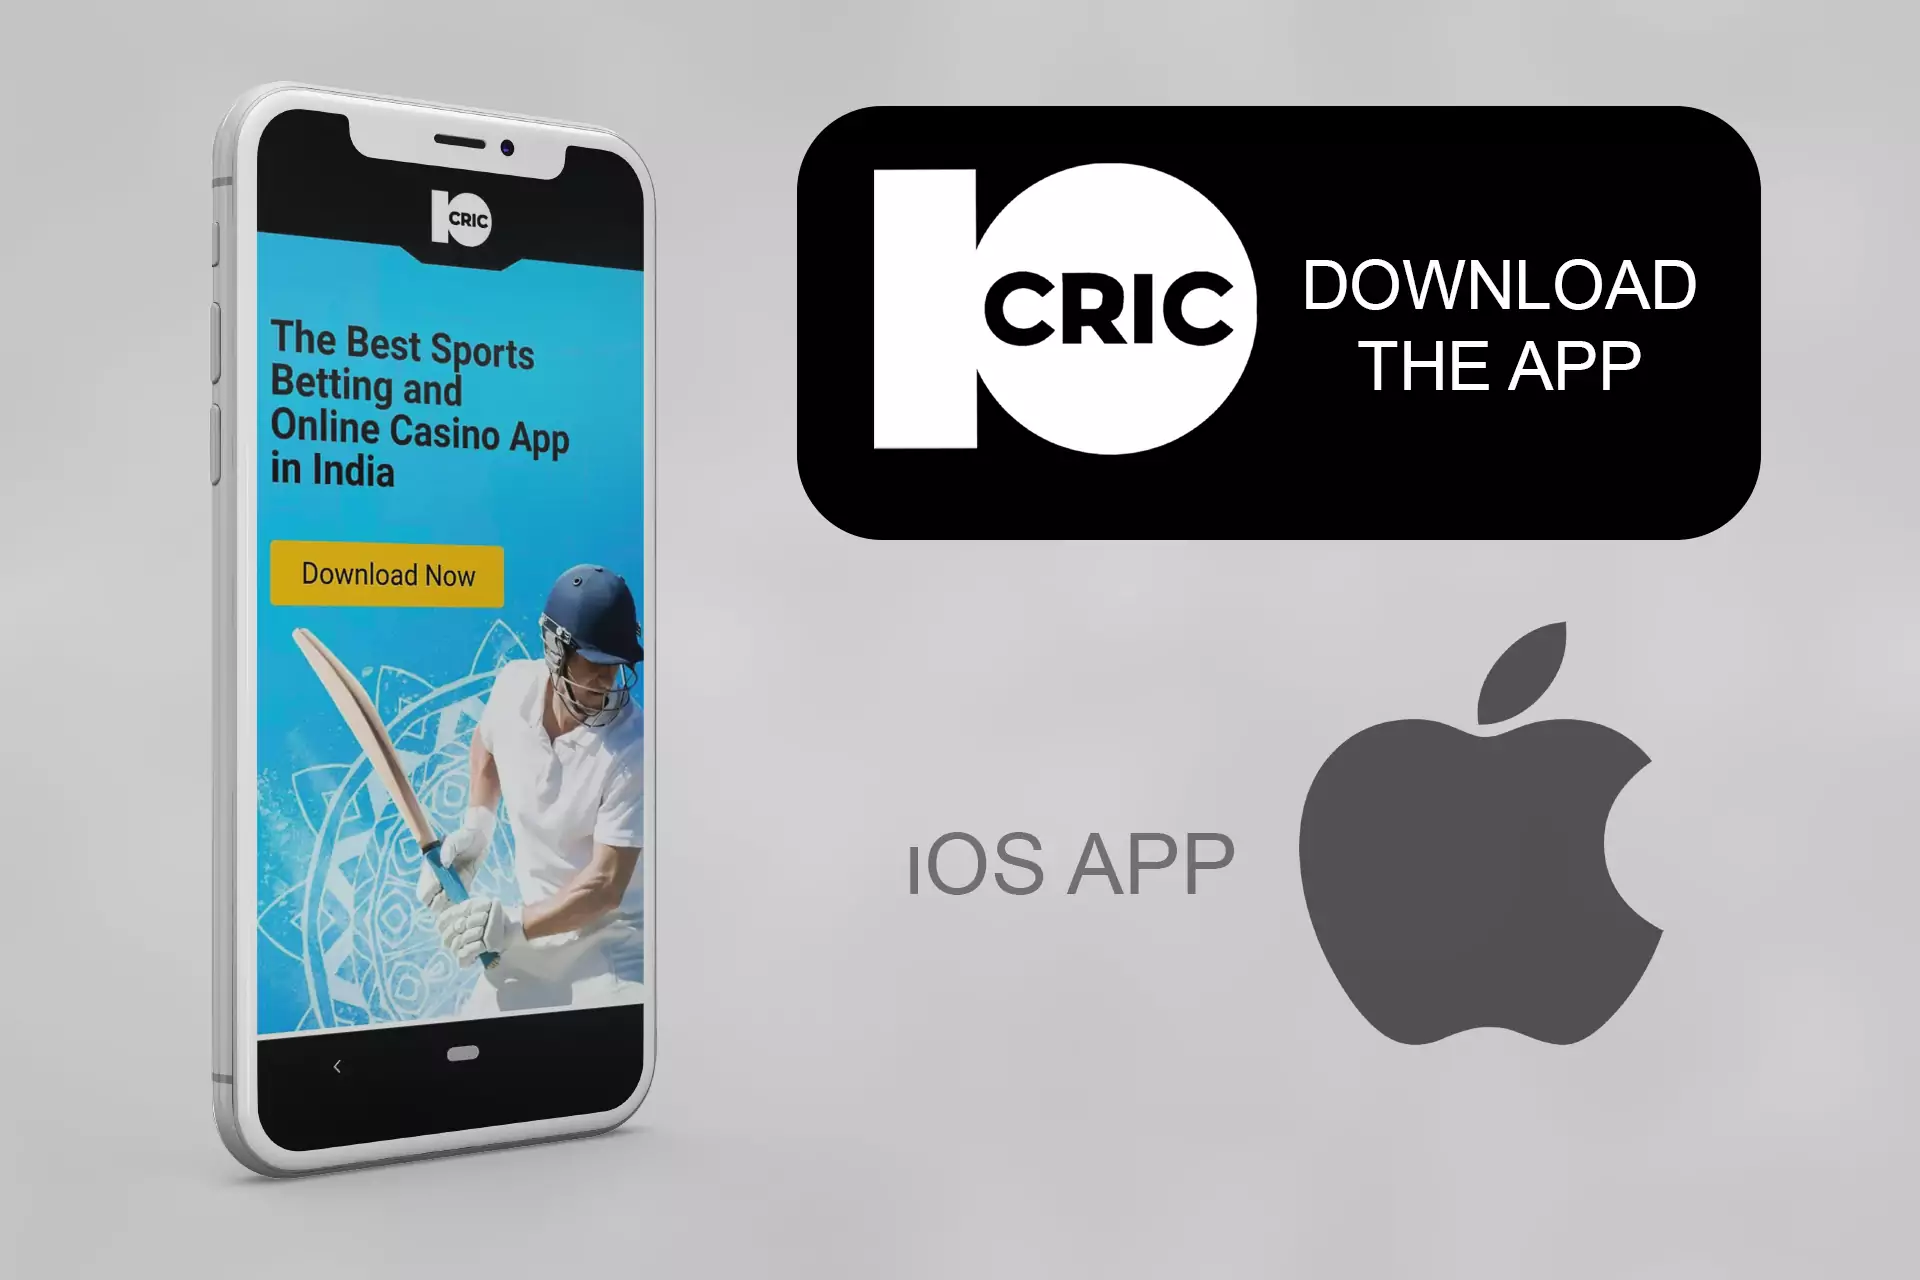 Download and install the app for iPhone from the official site.